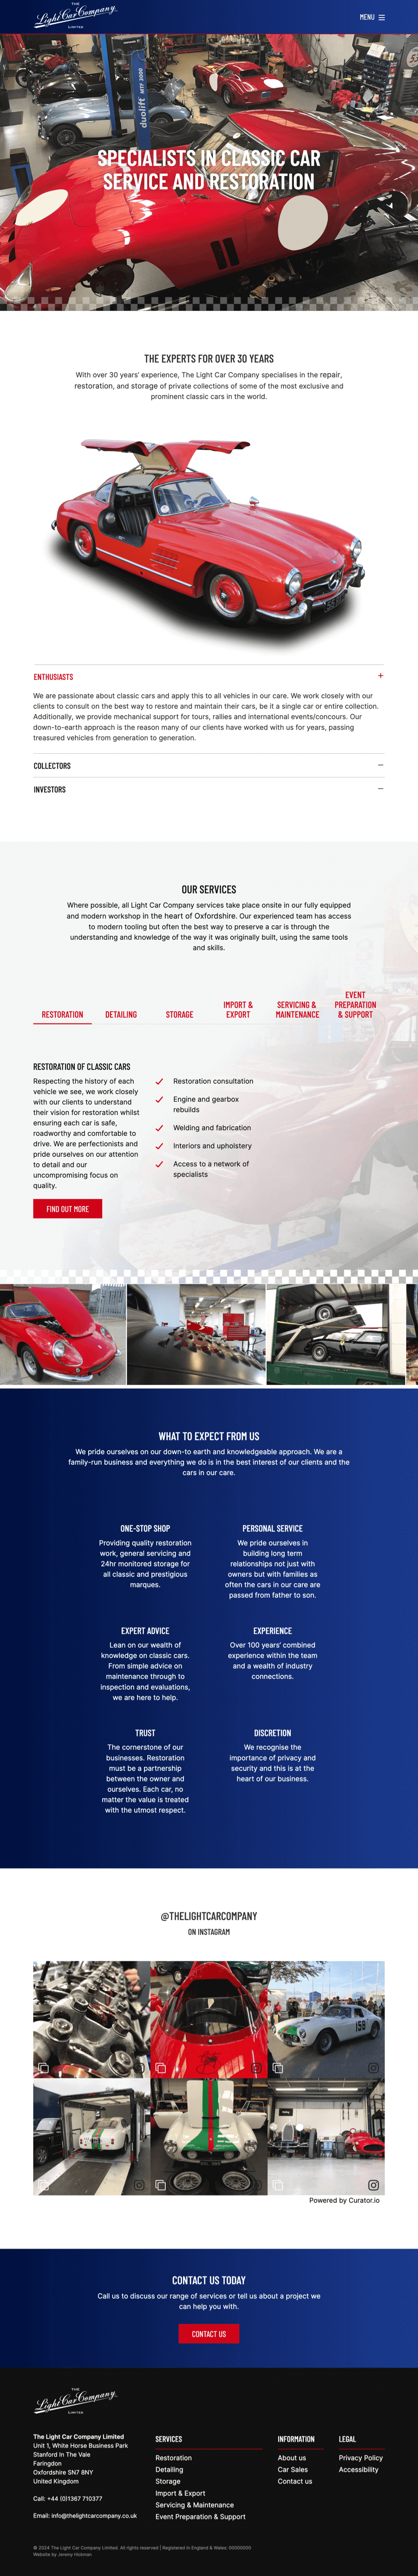 The Light Car Company (Website simulation on a tablet)